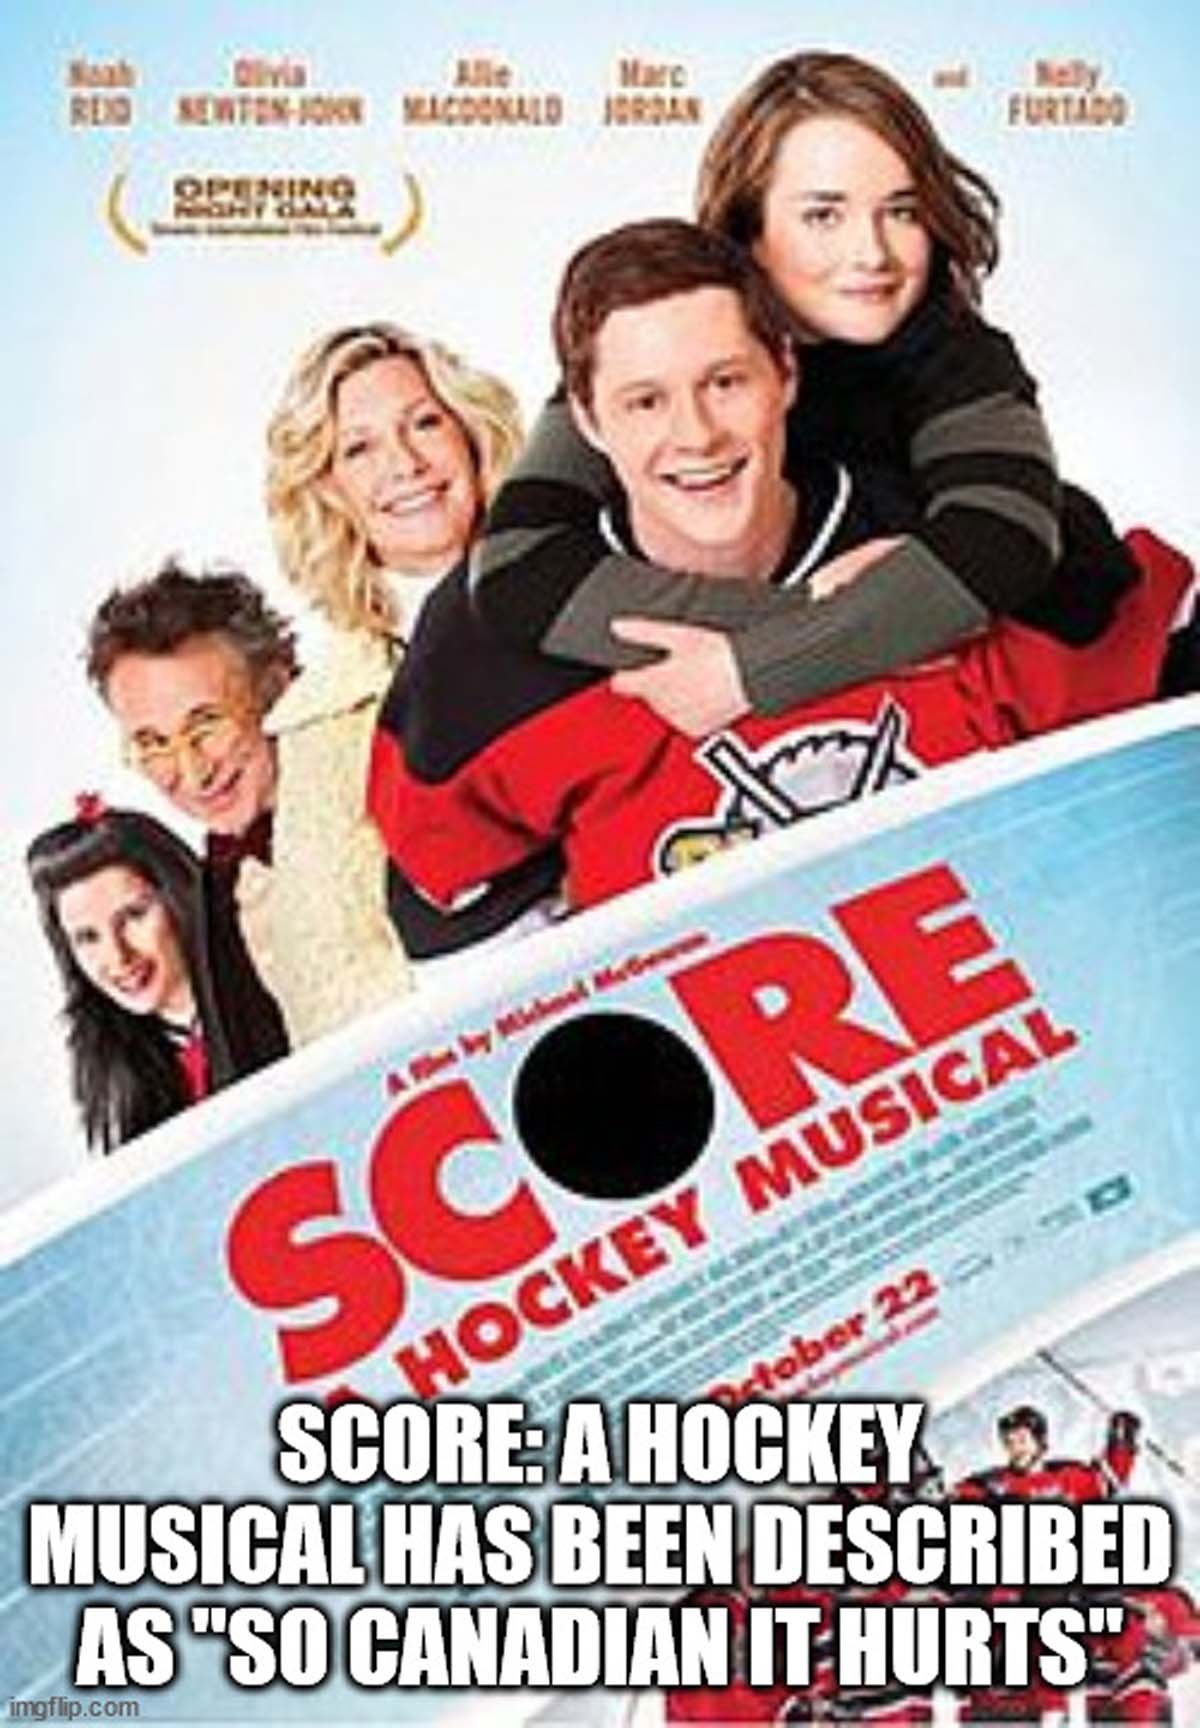 score a hockey musical - Olivia Alle Marc Nely Furtado Red NewtonJohn Macdonald Jordan Opening imgflip.com Scor Hockey Mu ctober 22 Score A Hockey E Musical Has Been Described As "So Canadian It Hurts"